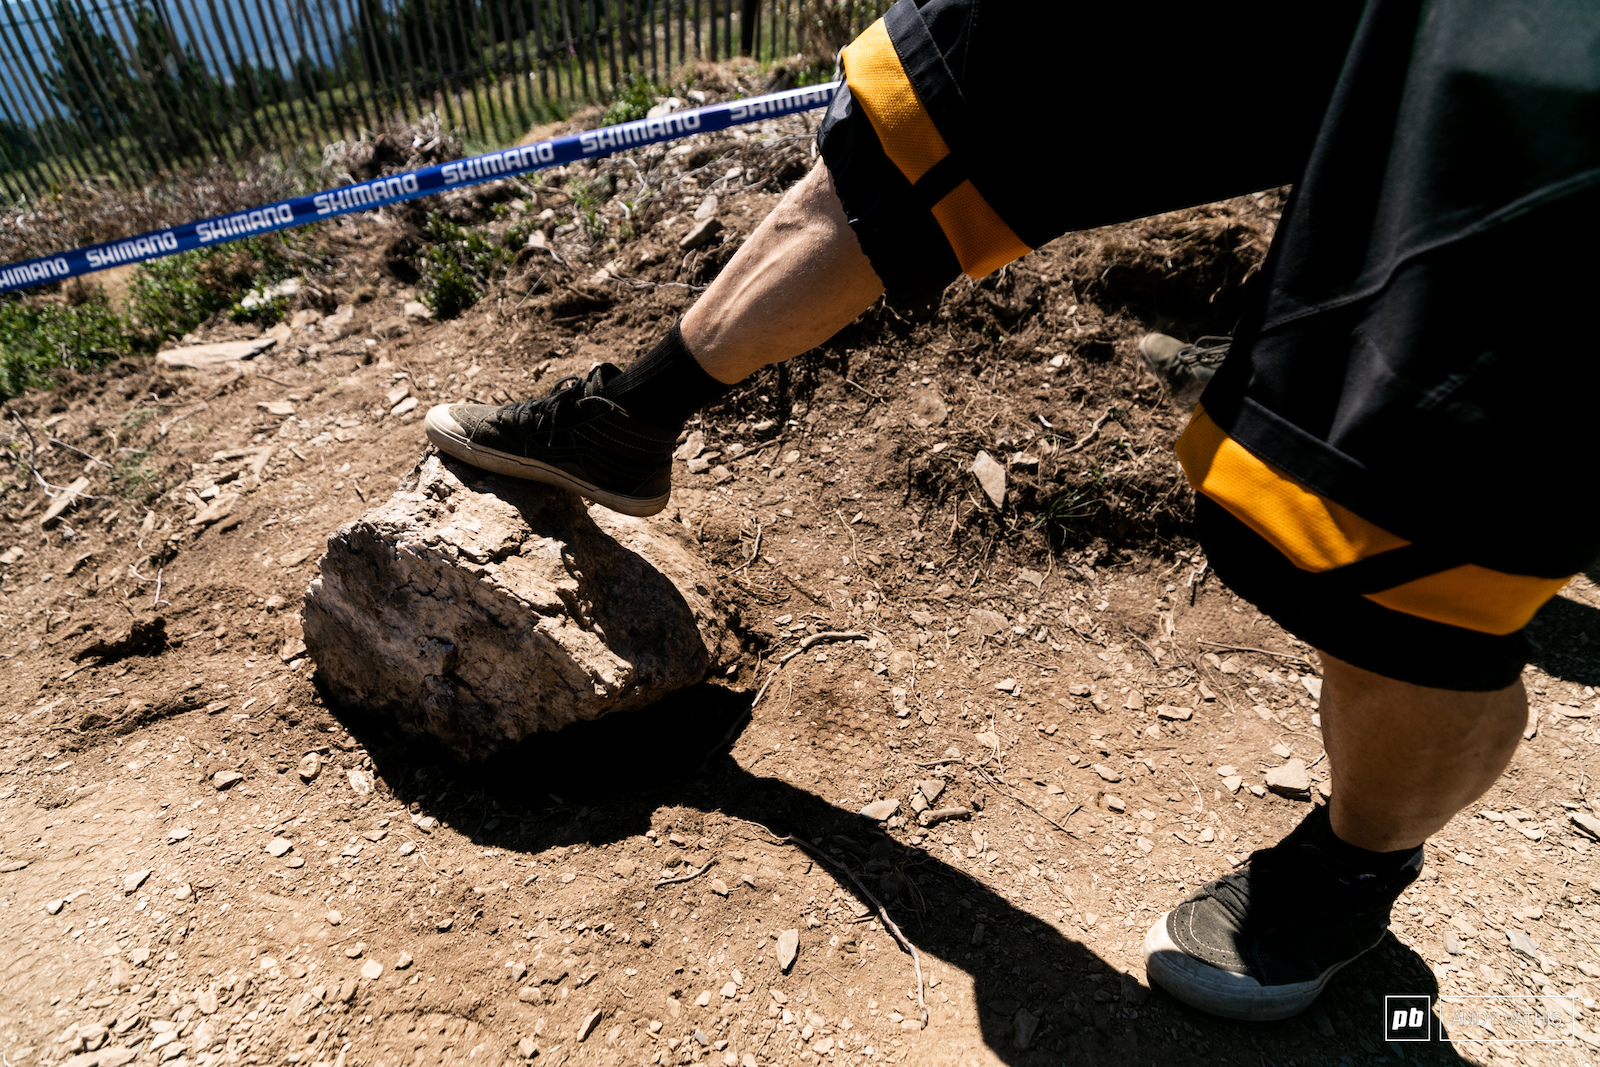 The track is so fresh that a few loose boulders are still wandering around.